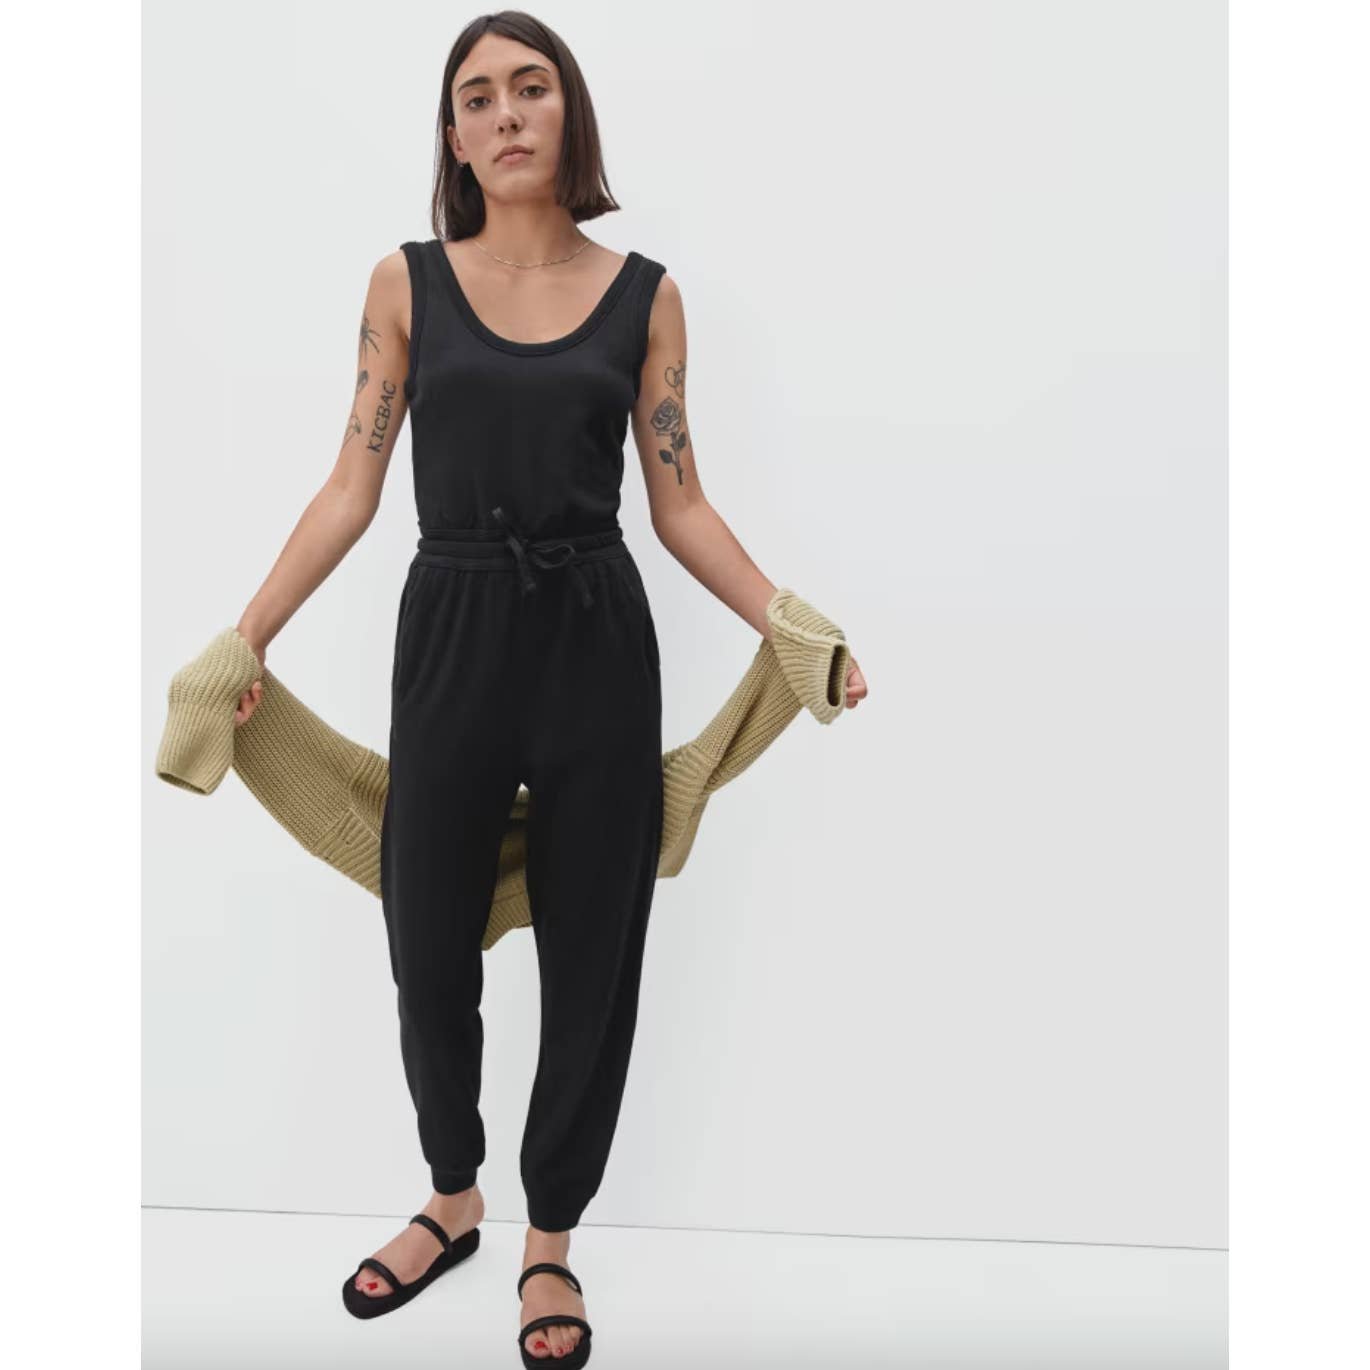 large selection Everlane Black French Terry Lounge Sleeveless Jumpsuit M HdXXbB6sM all for you